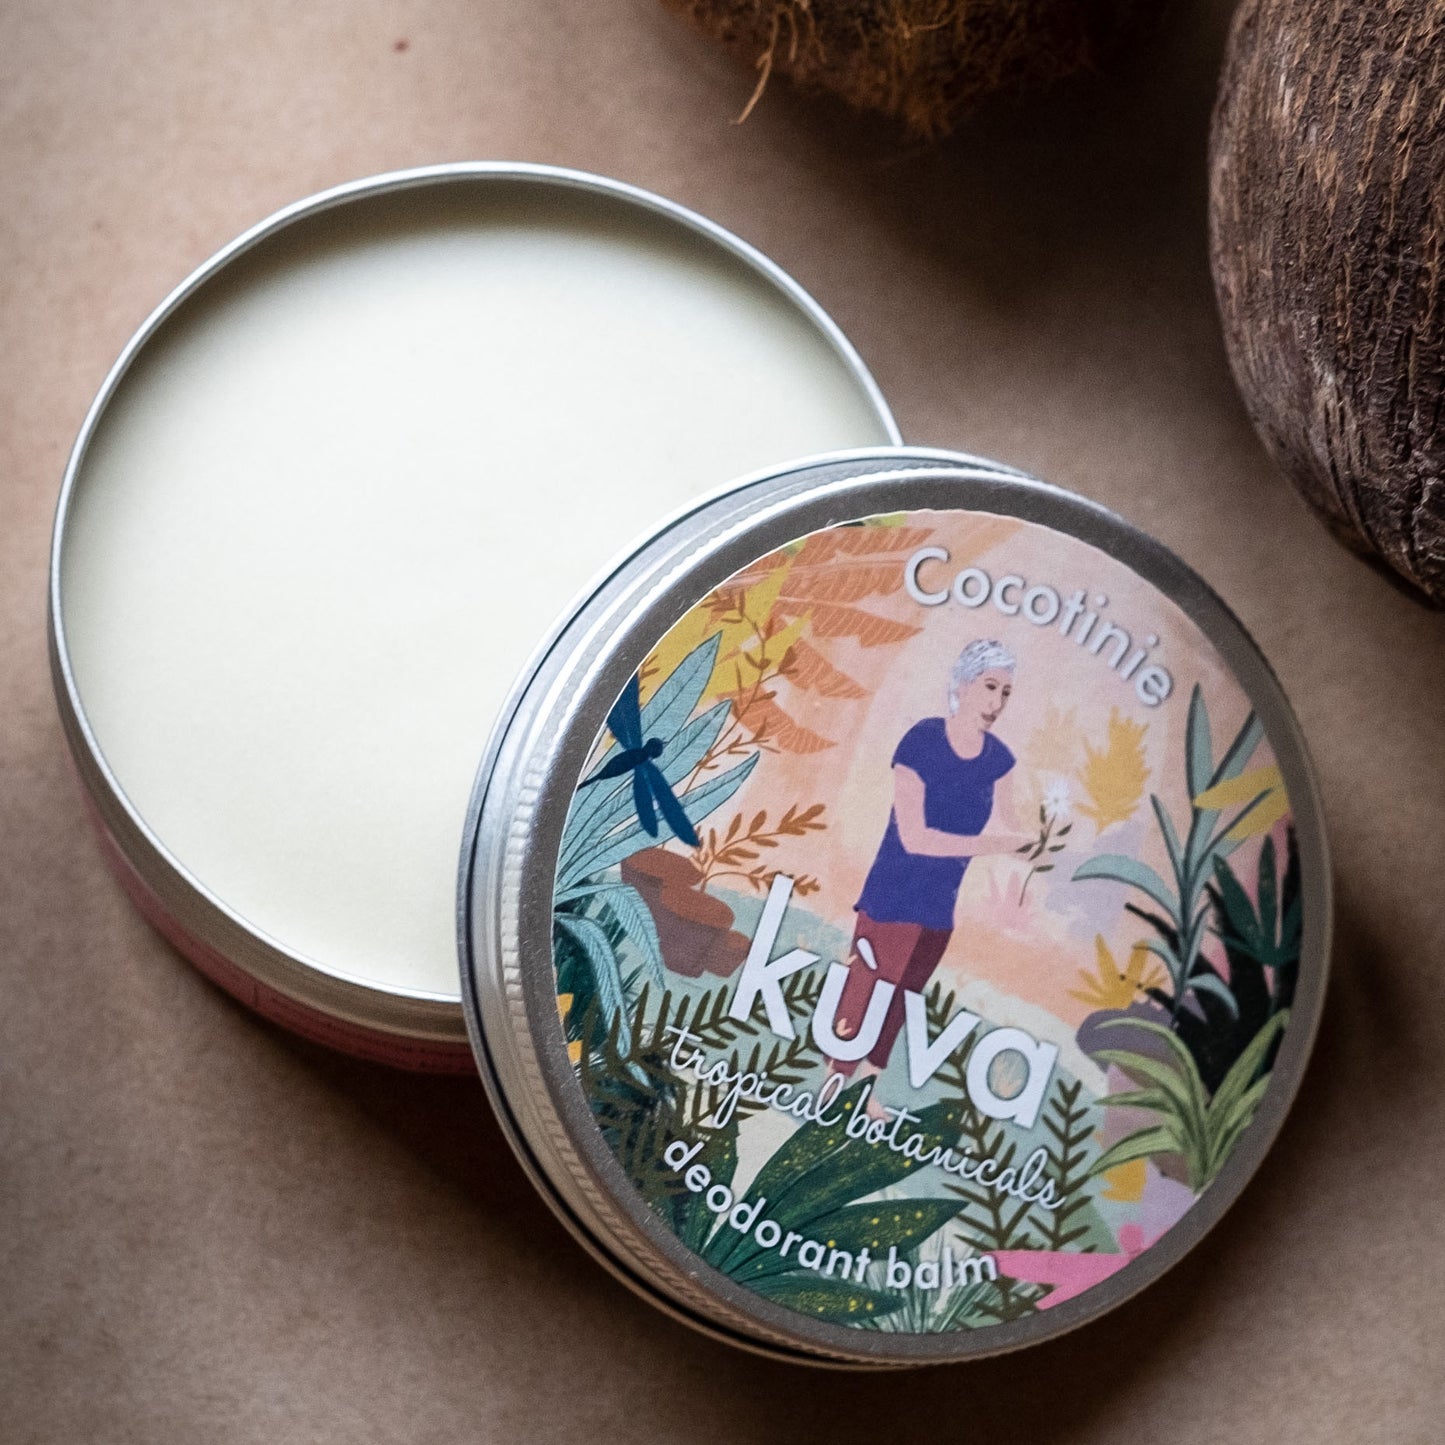 'Cocotinie' Deodorant Balm - 100 gms - Unscented ~Baking Soda Free~